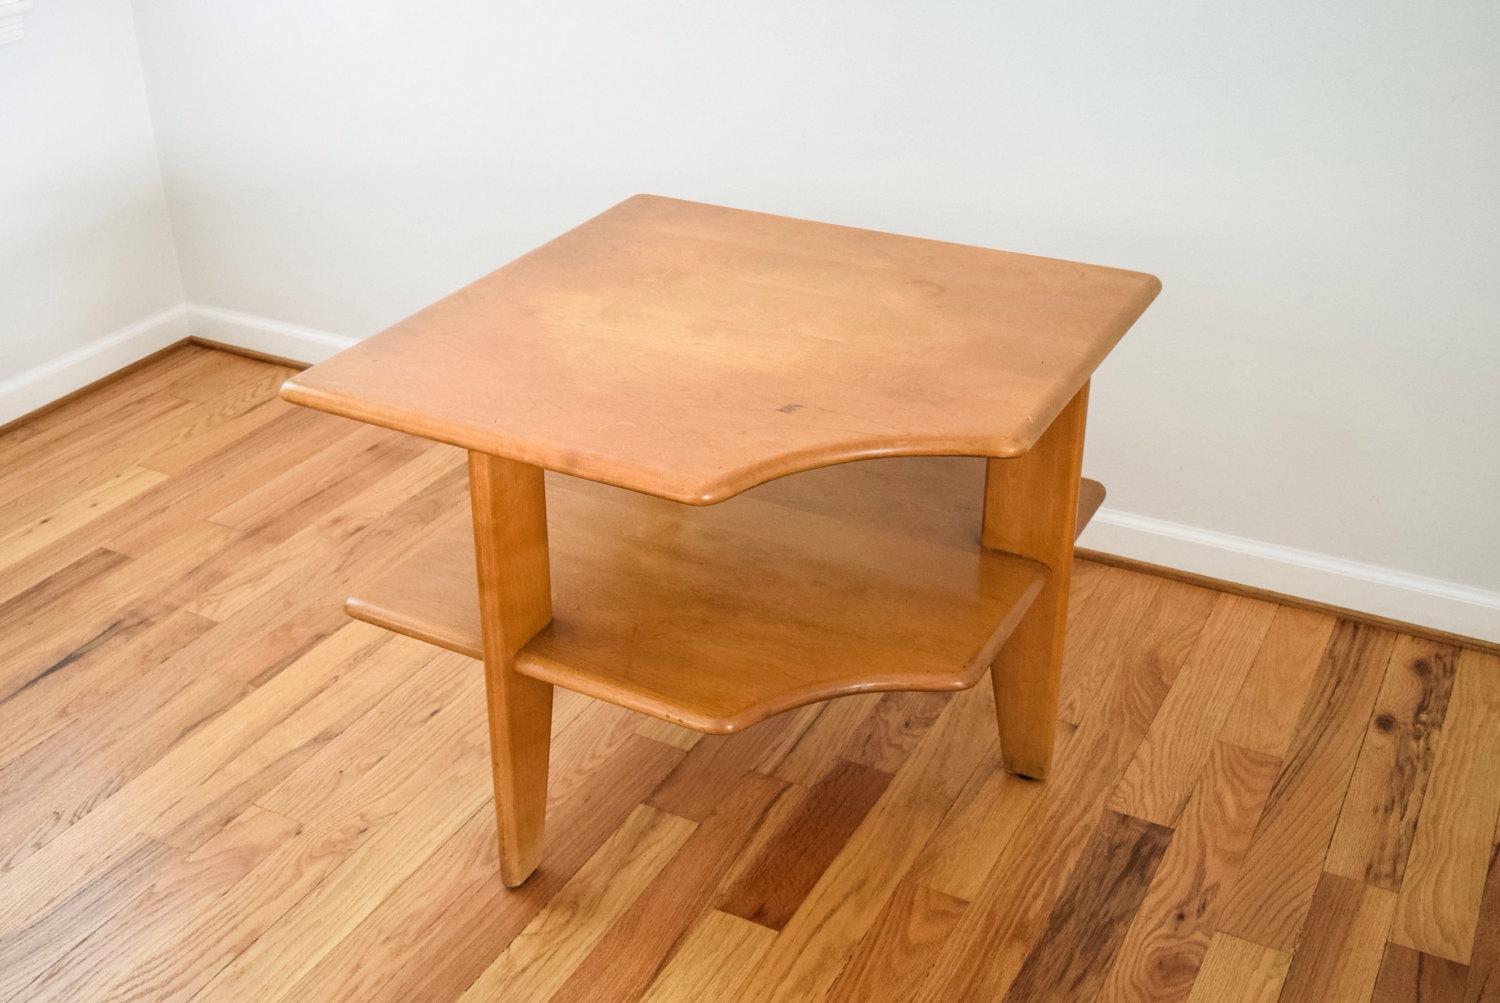 • Rare Mid-Century Modern Heywood-Wakefield corner end table.
• Model C3755-G produced between 1940-44.
• Solid maple wood in champagne finish.
• Classic Heywood Wakefield surfoard style with rounded edges and corners.
• Produced prior to burned